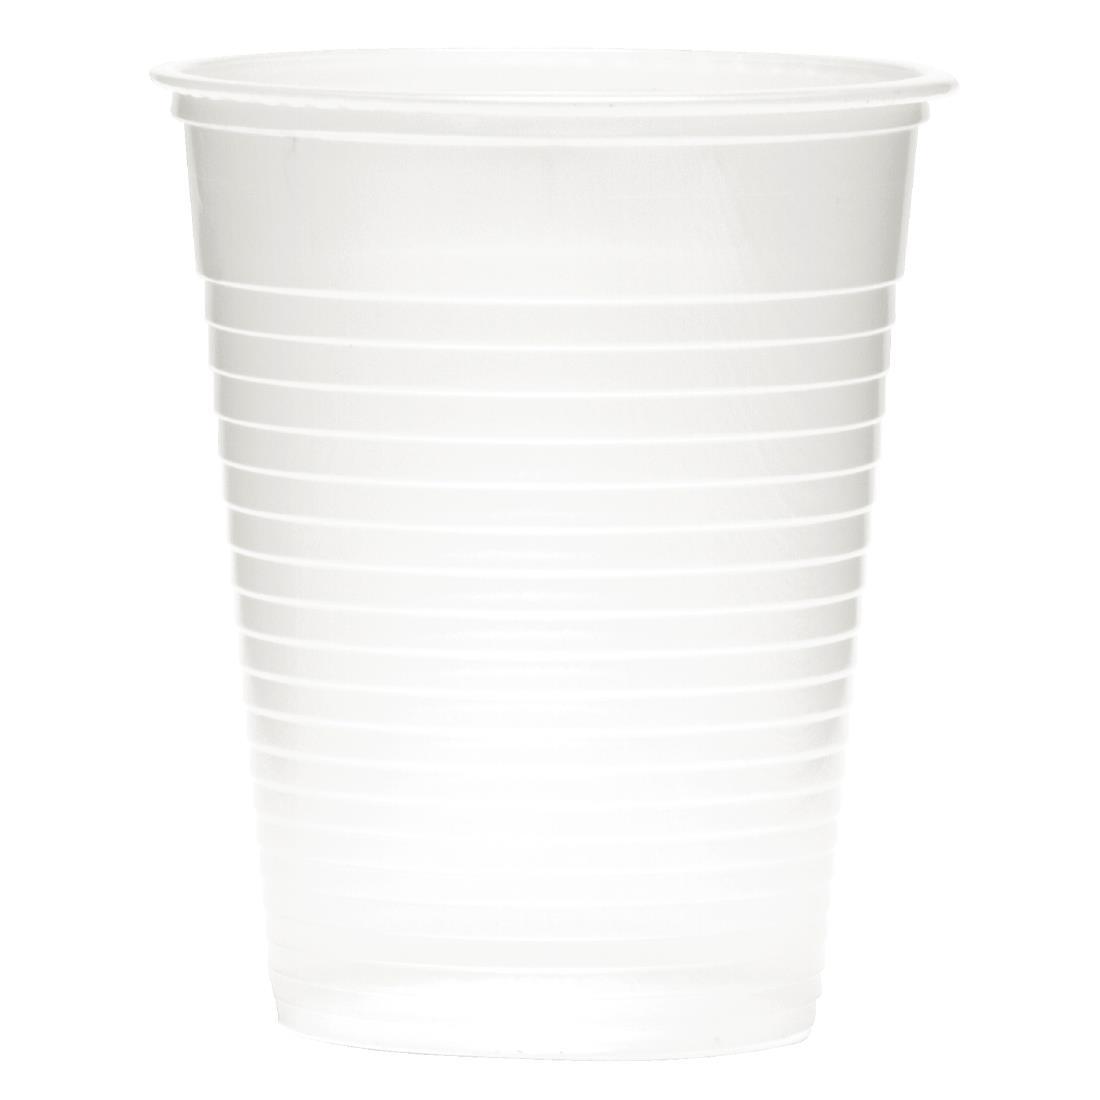 Water Cooler Cups Translucent 200ml / 7oz (Pack of 2000) - U212  - 1